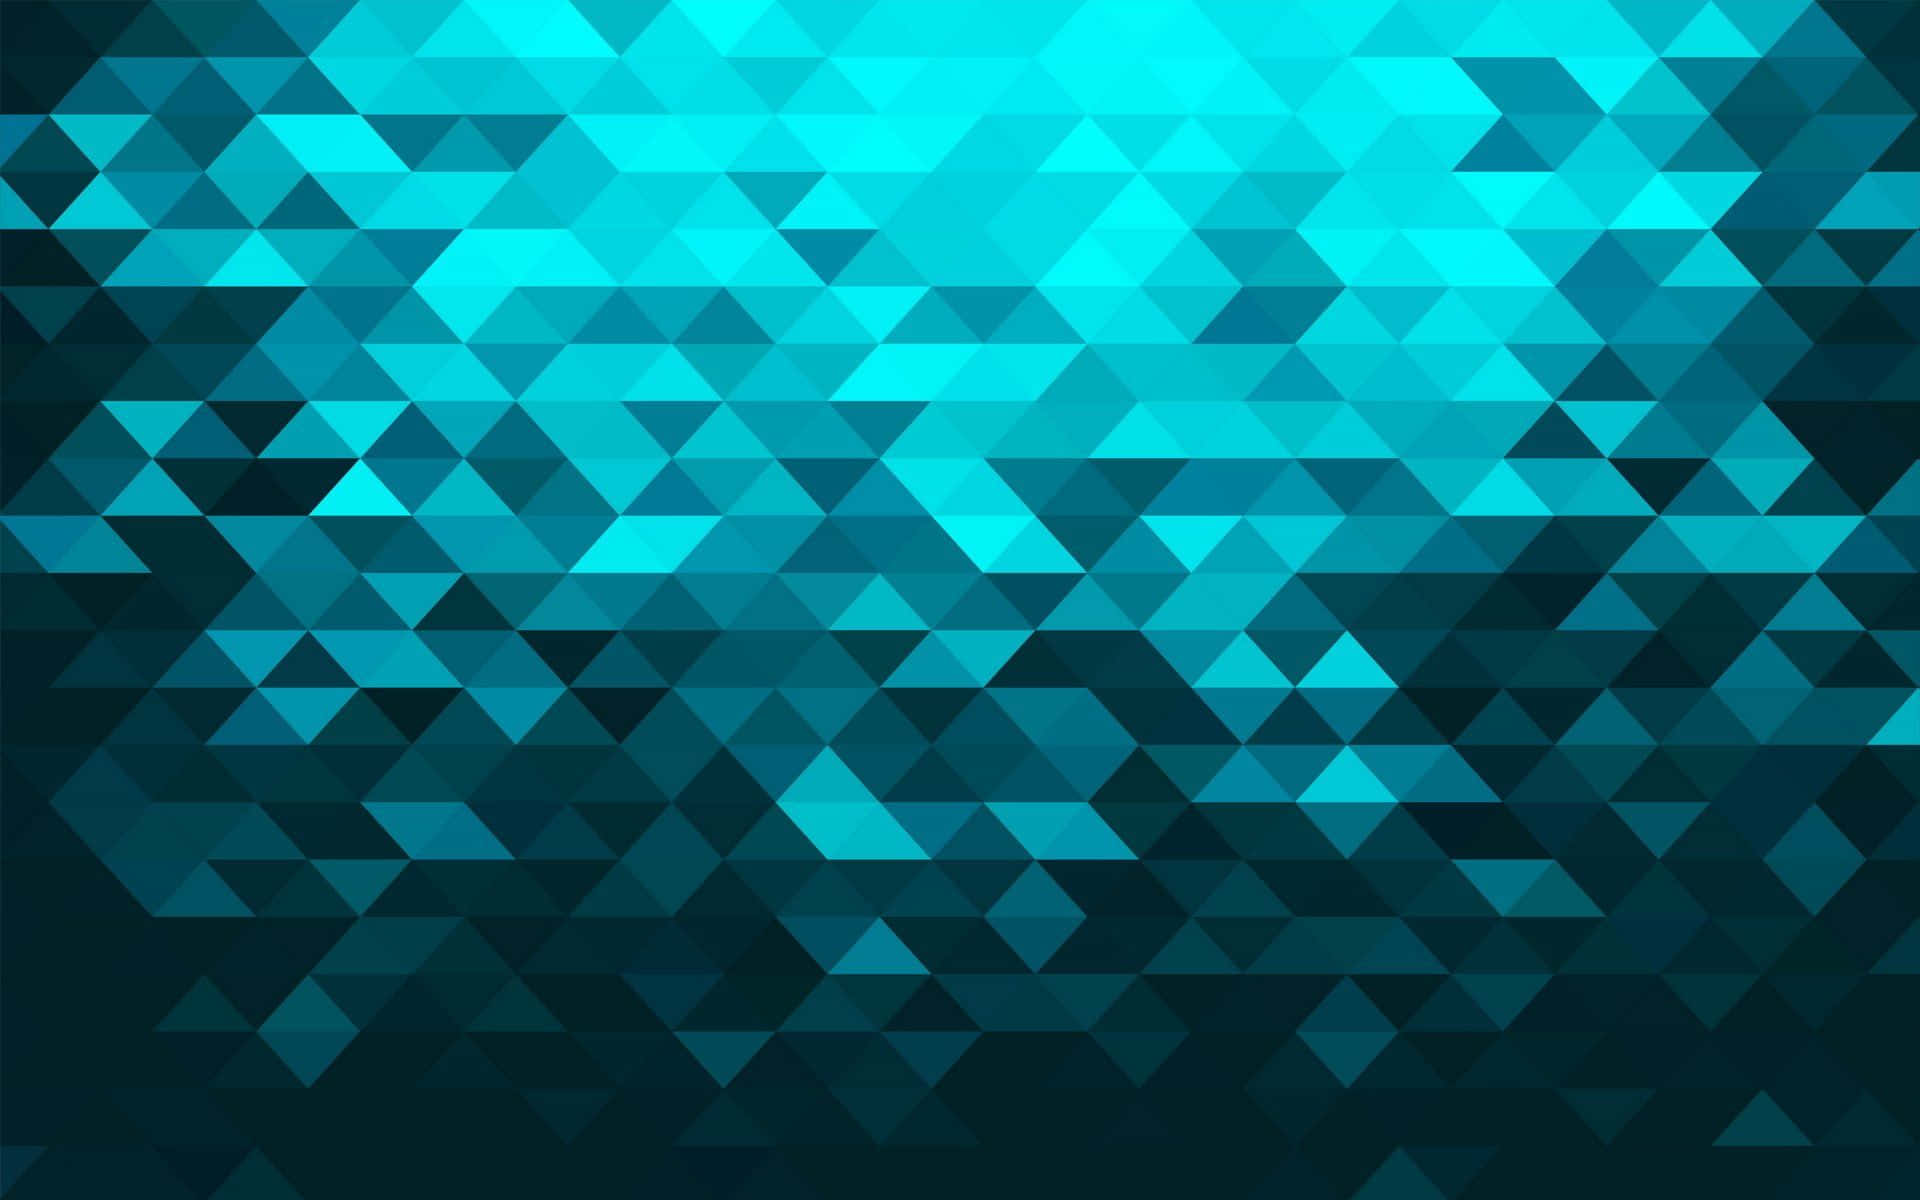 A beautiful turquoise background with a unique abstract pattern.